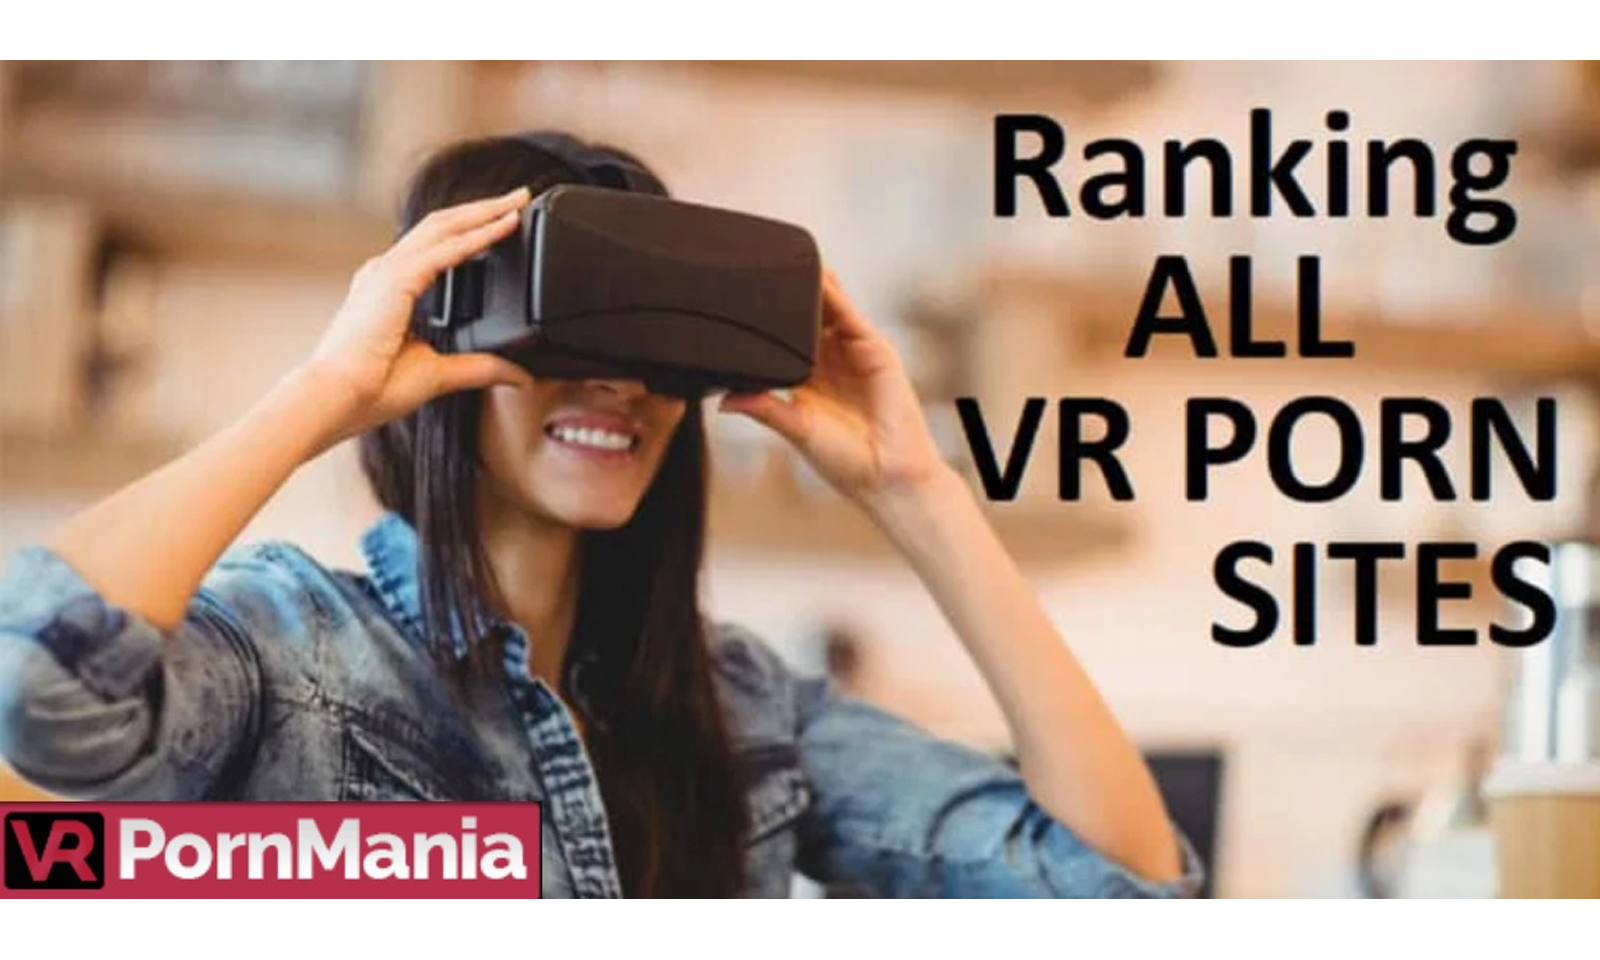 VRPornMania Offers Discounts To Help Brands Build Momentum